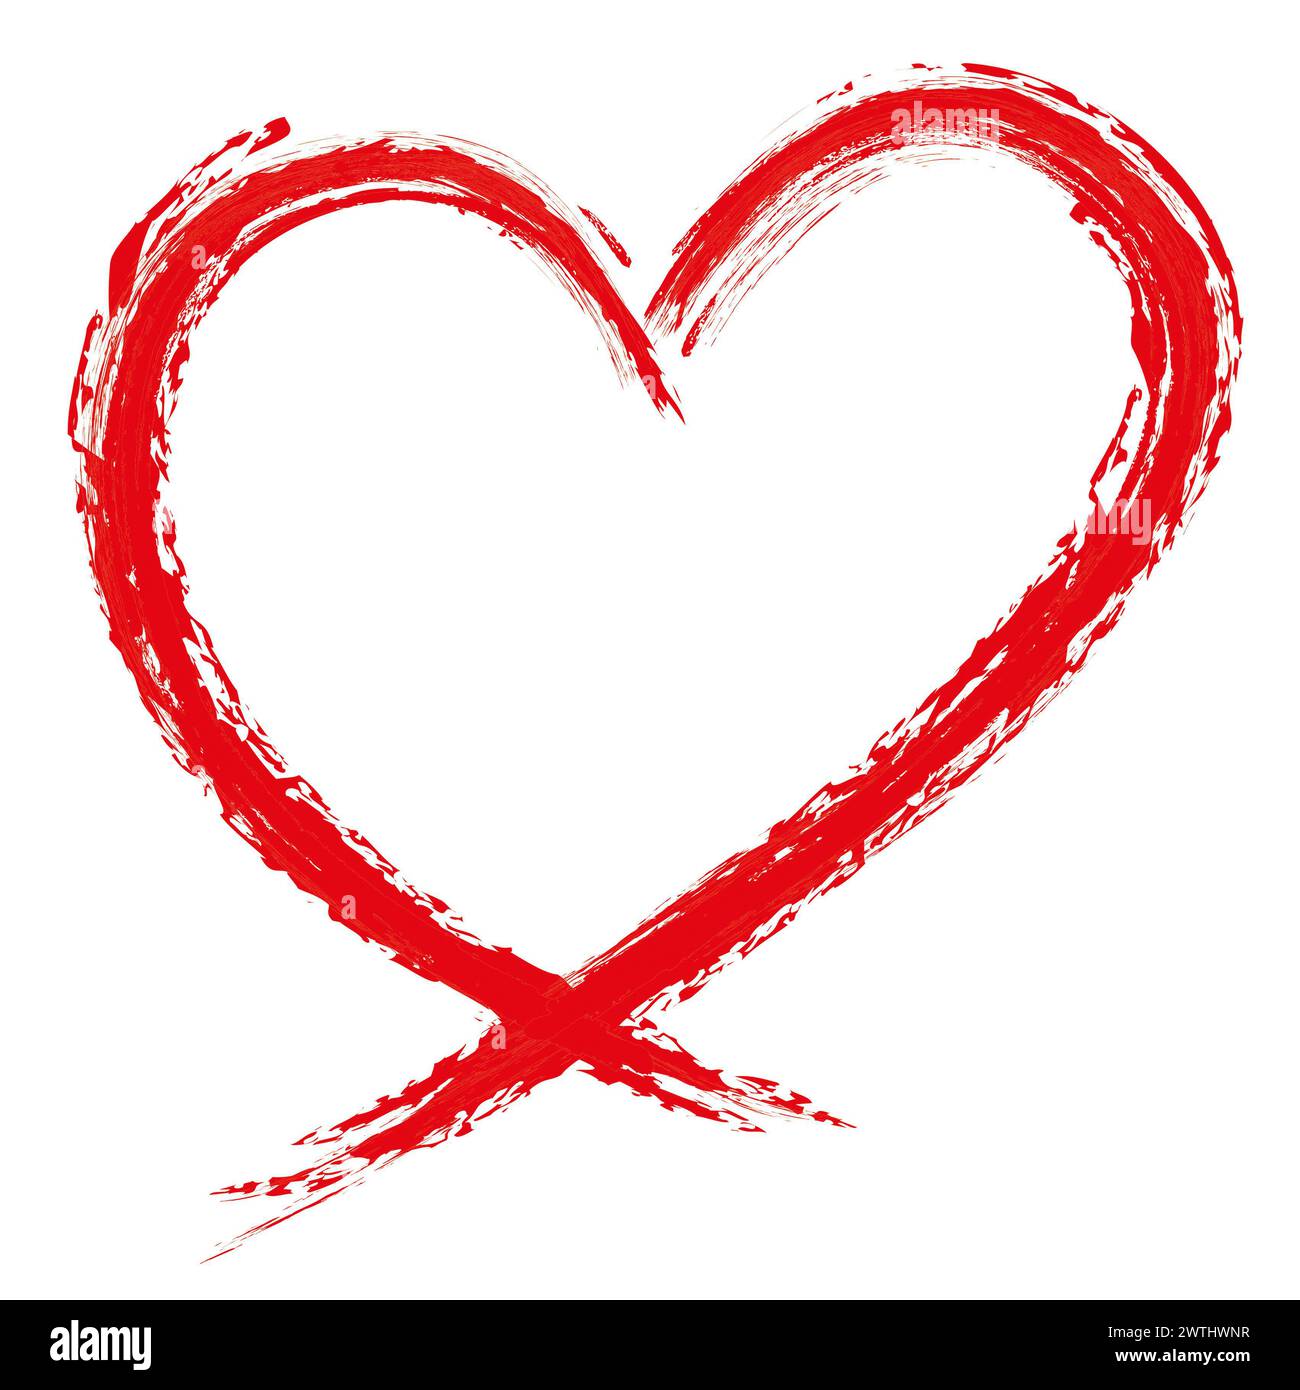 Grunge red love heart made of rough strokes isolated over white background for Valentines Day, wedding or other purpose. Hand drawing. Stock Photo